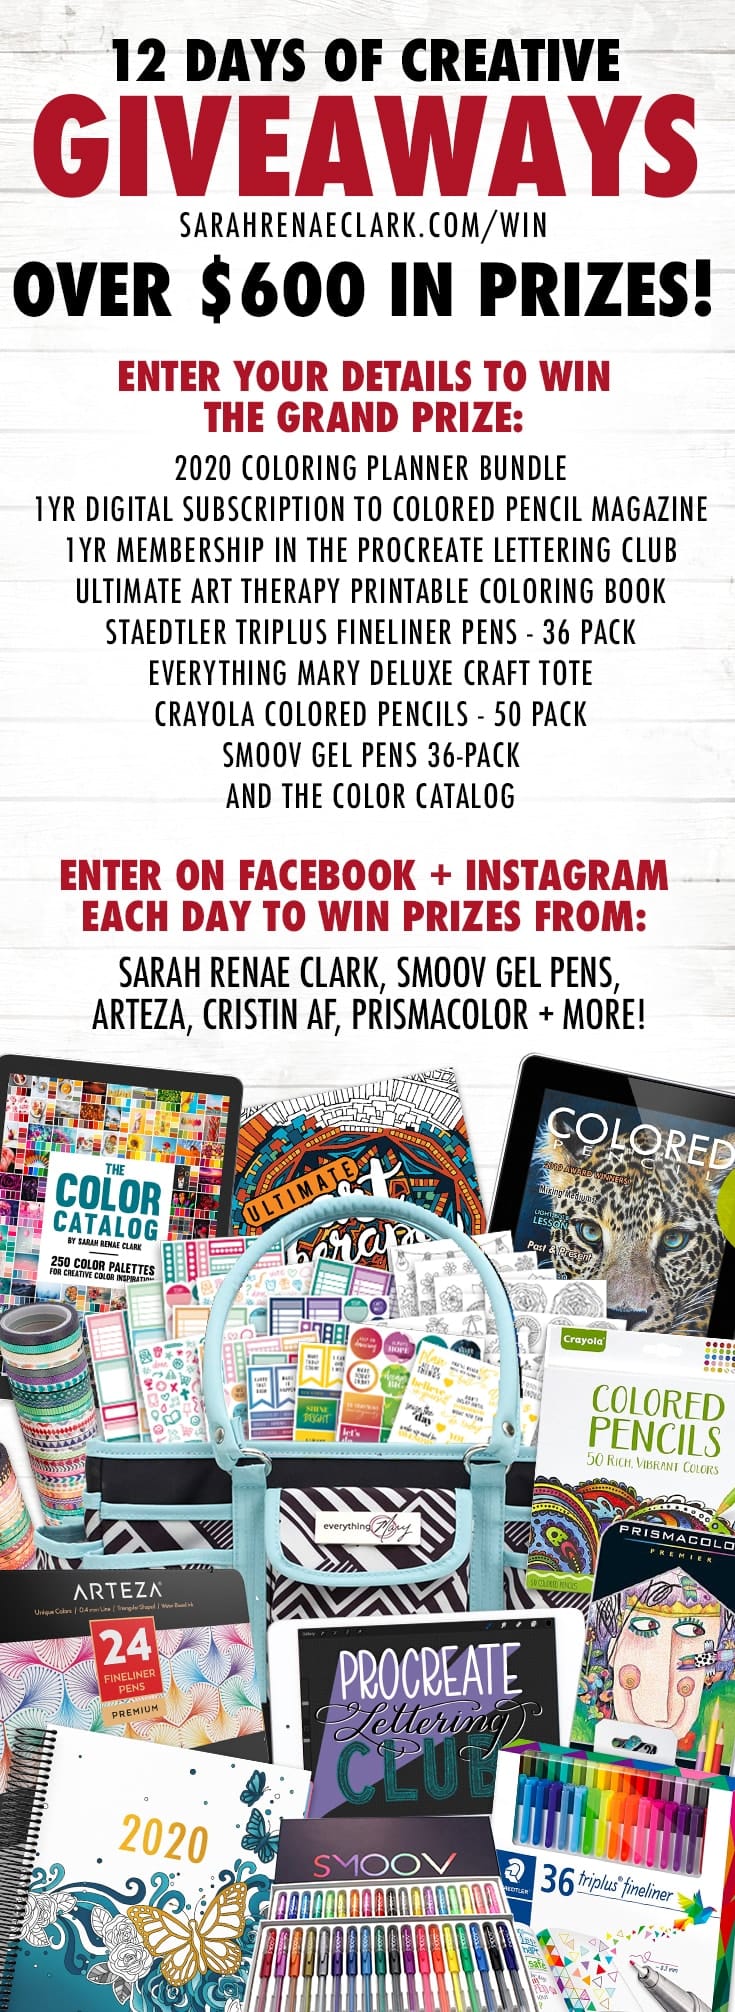 12 Days of Creative Giveaways: Over $600 in prizes to be won